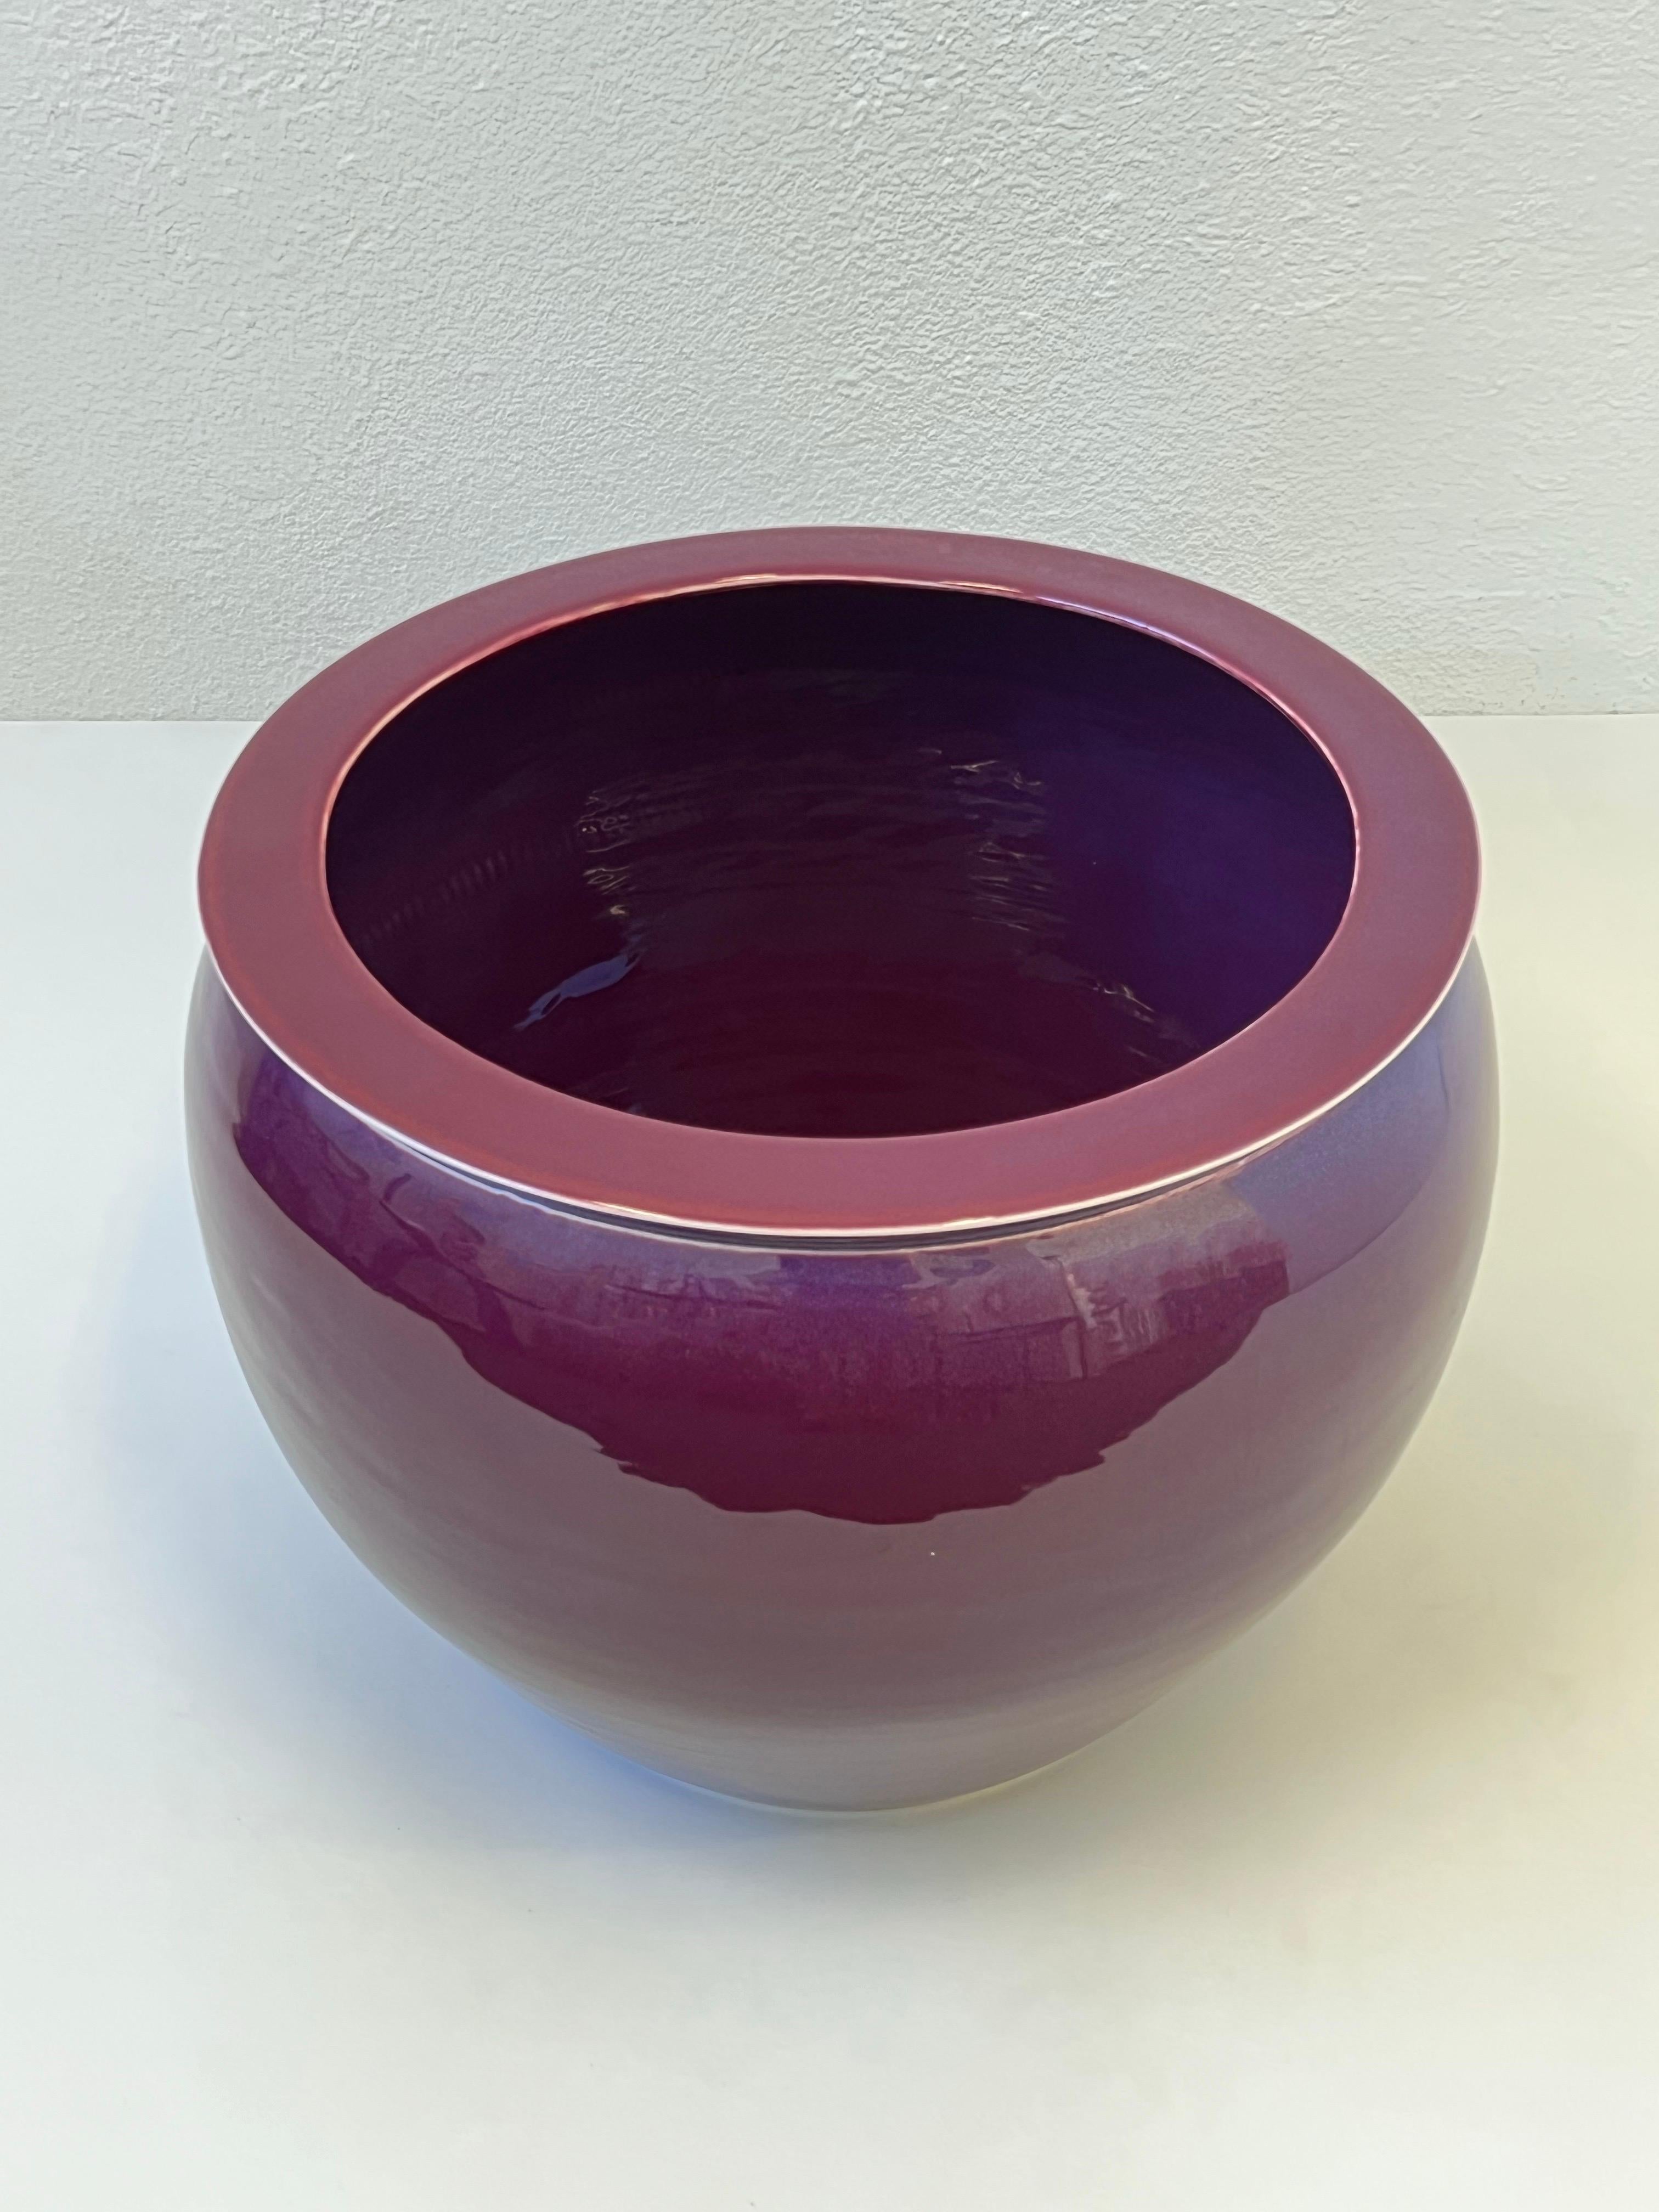 Rare burgundy purple glazed porcelain planter by renowned designer Karl Springer. 
In beautiful vintage condition, with minor wear consistent with age( see detail photos).

Measurements: 22” Diameter, 17” High.”